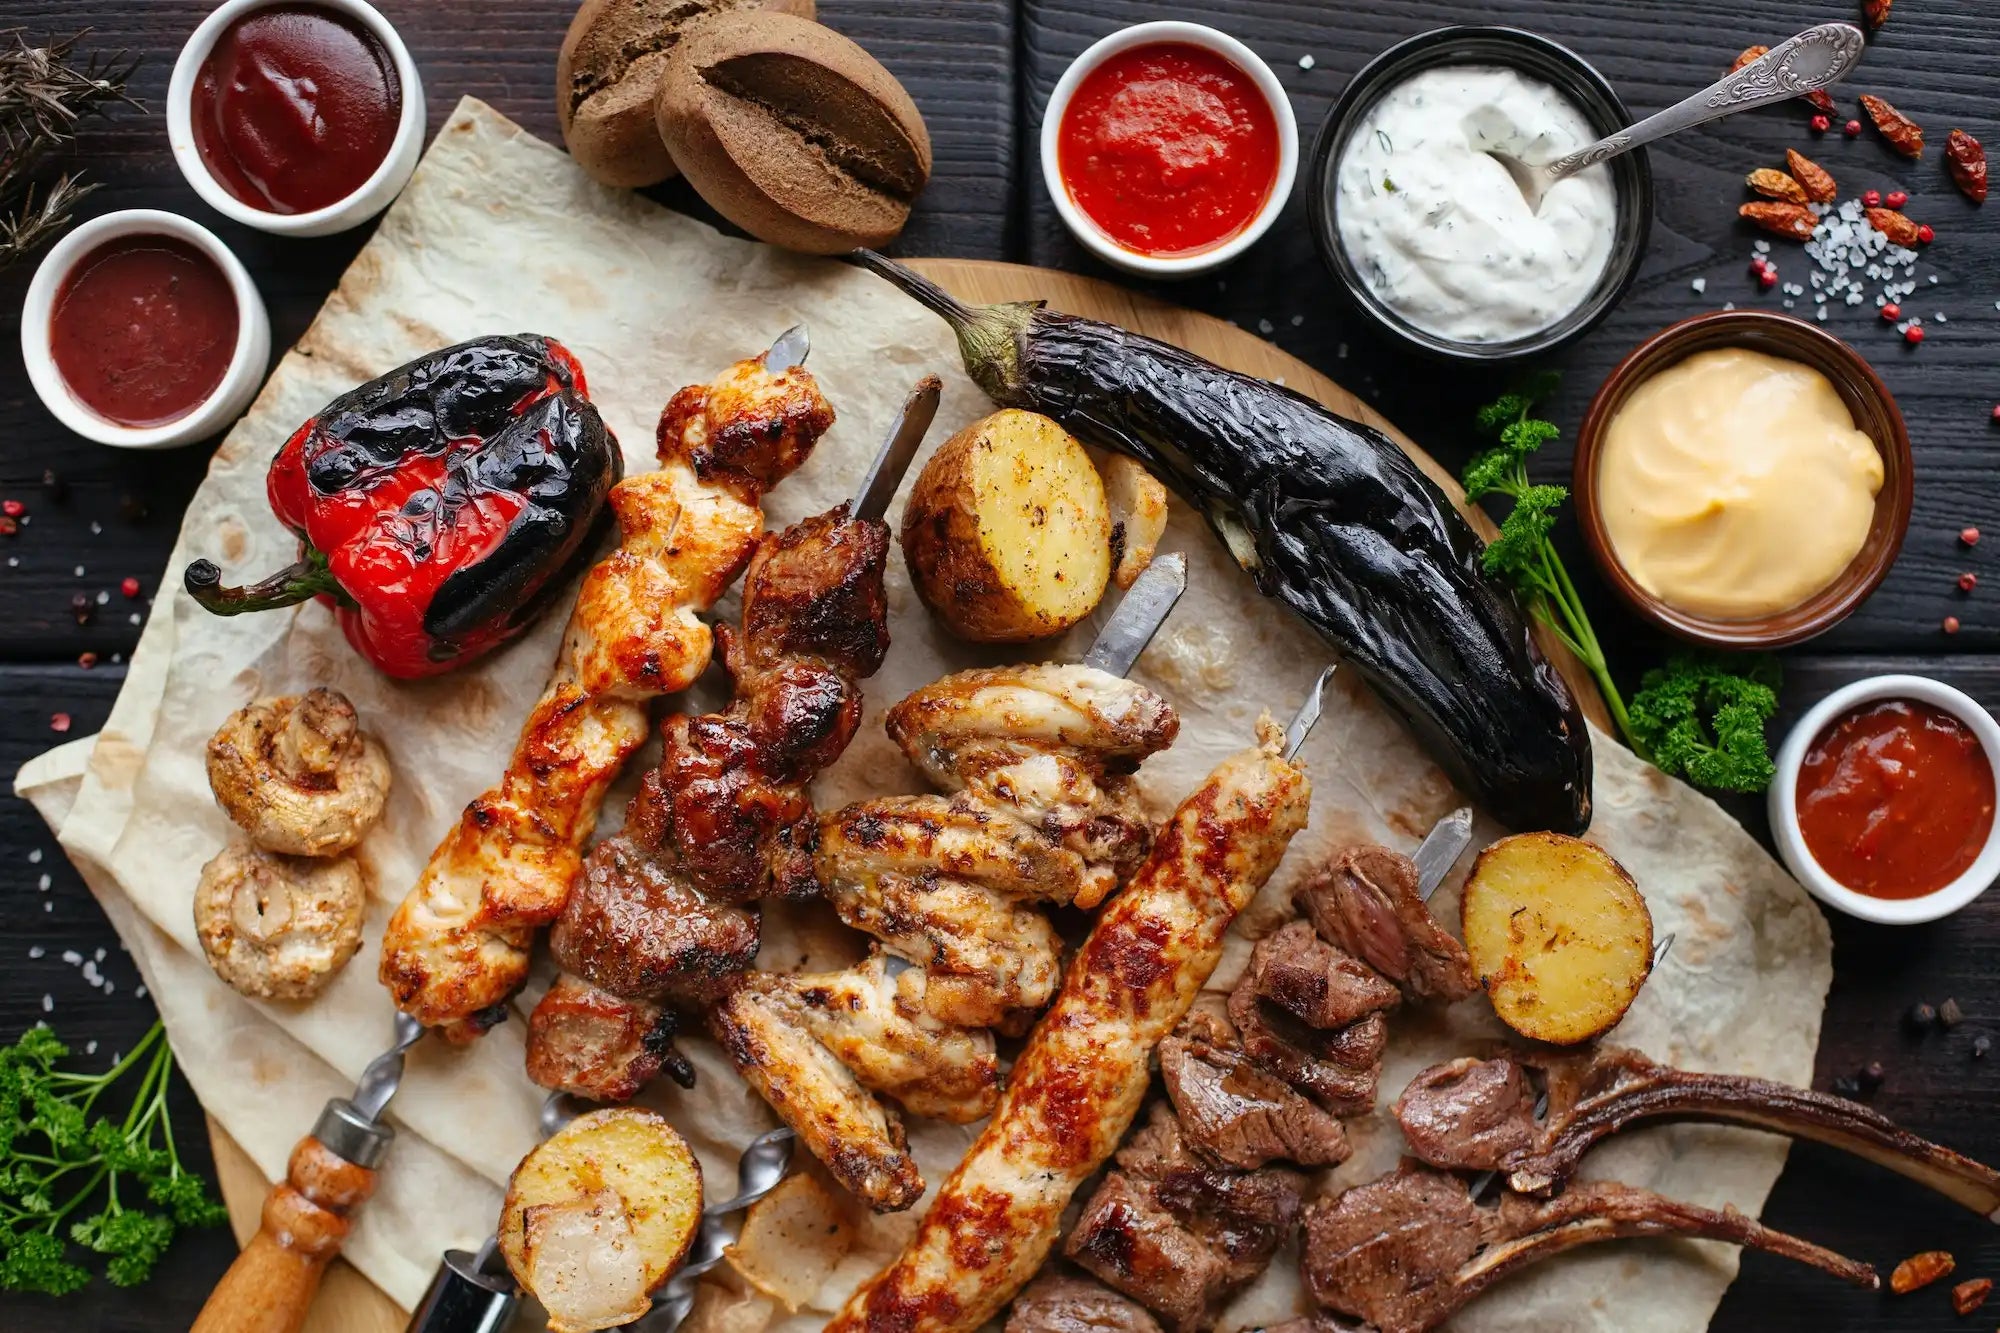 variety of grilled meats and vegetables with side sauces